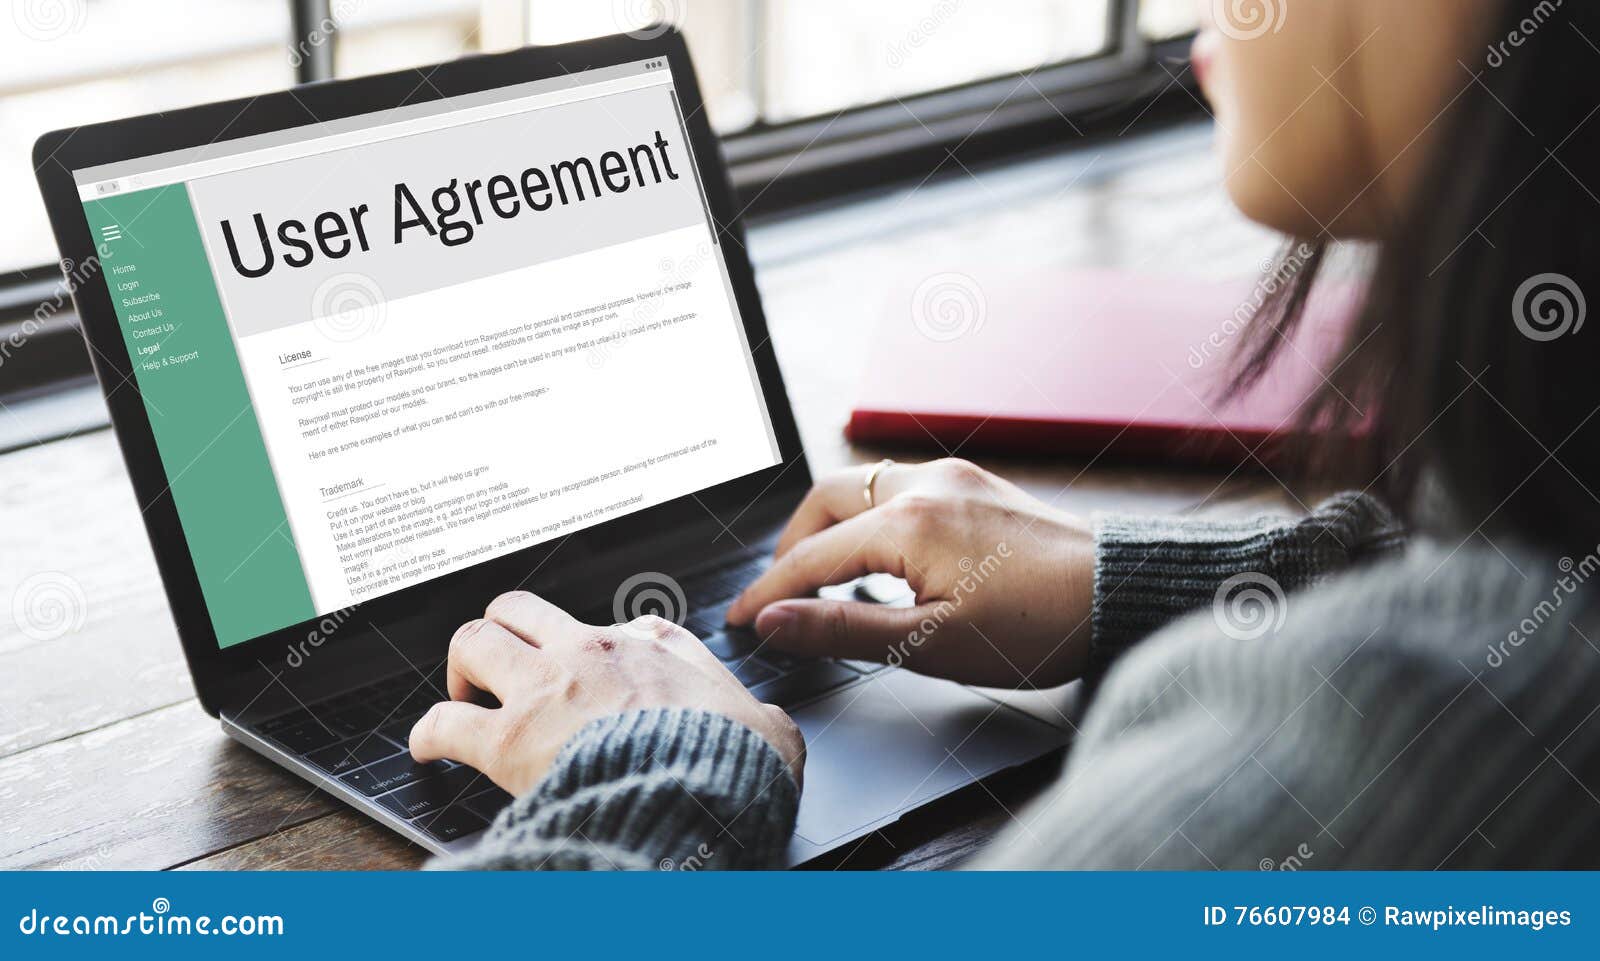 users agreement terms and conditions rule policy regulation conc